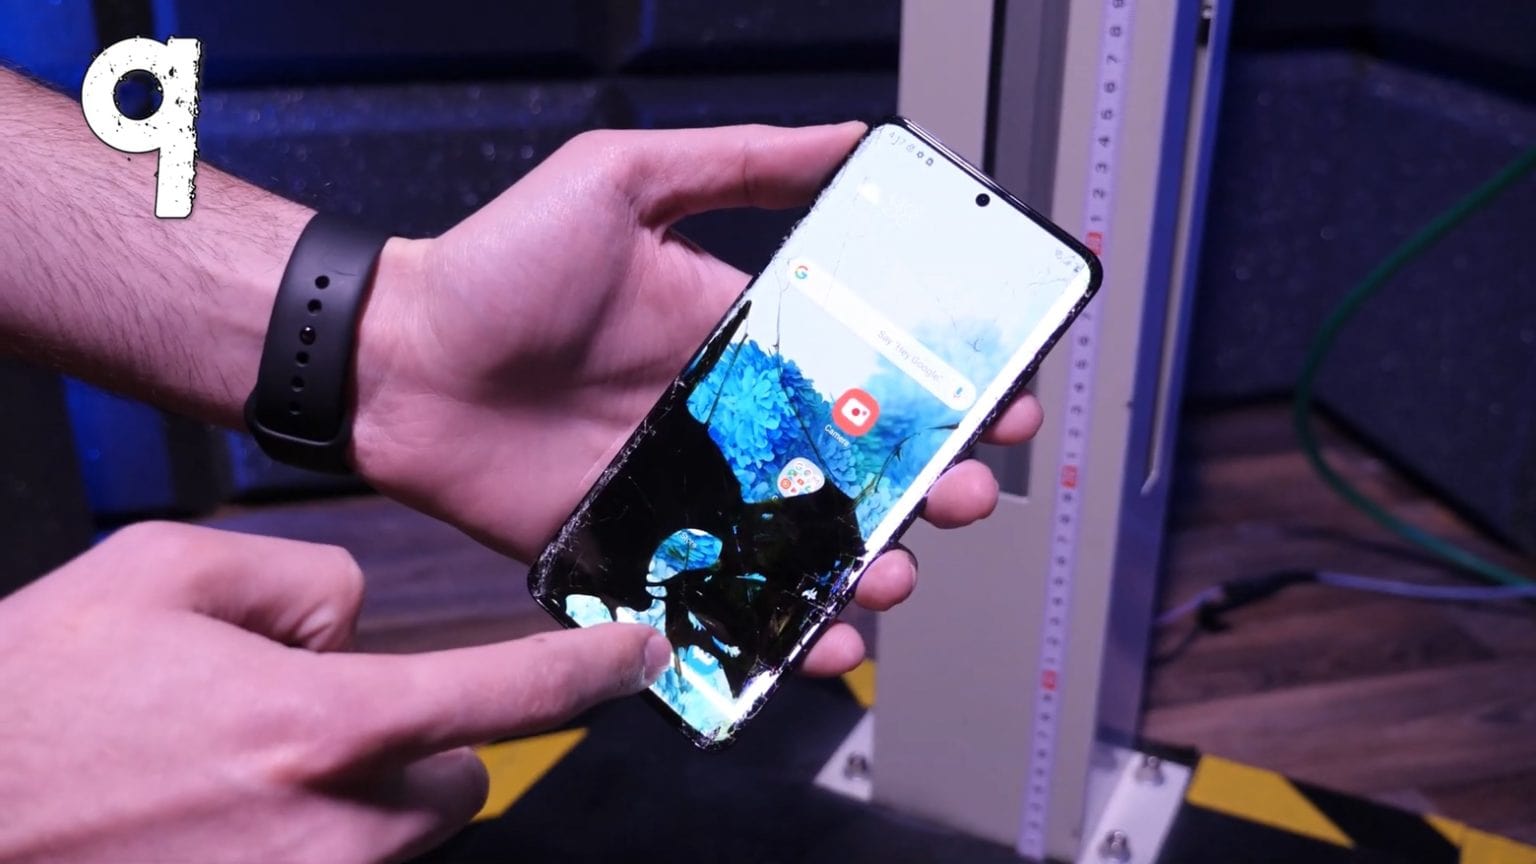 Samsung Galaxy S20 Ultra is in worse shape an iPhone 11 Pro Max after multiple drop tests.